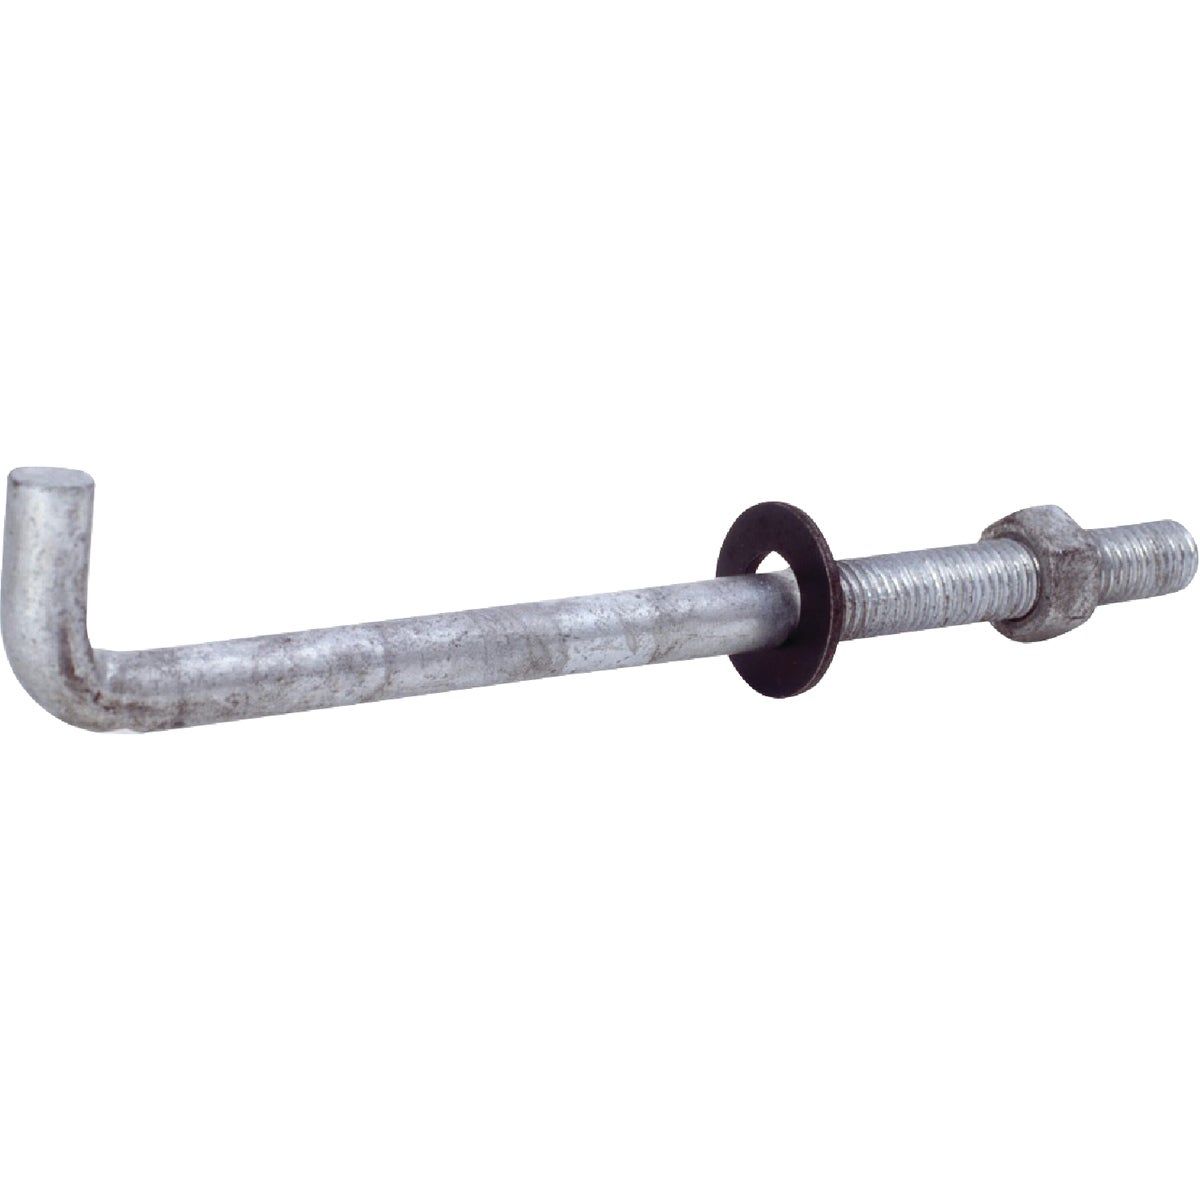 Grip-Rite 1/2 In. x 12 In. Bright Anchor Bolt with Round Washer (50 Ct.)